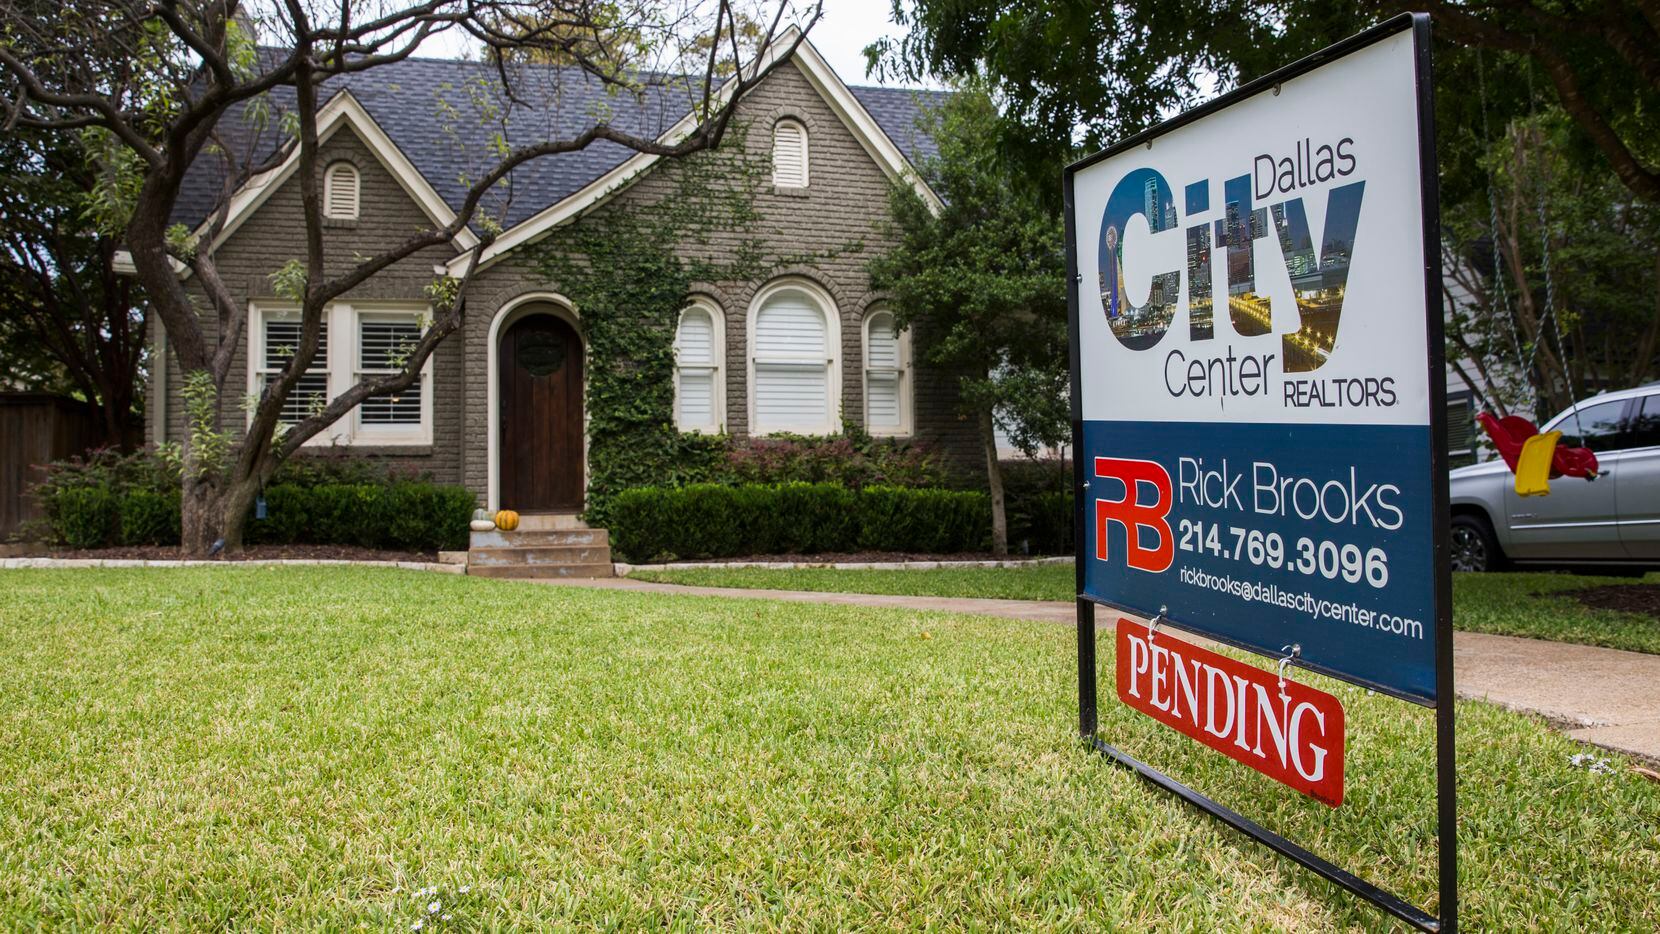 Dallas-area home prices were 6.7 percent higher in January compared with a year earlier.